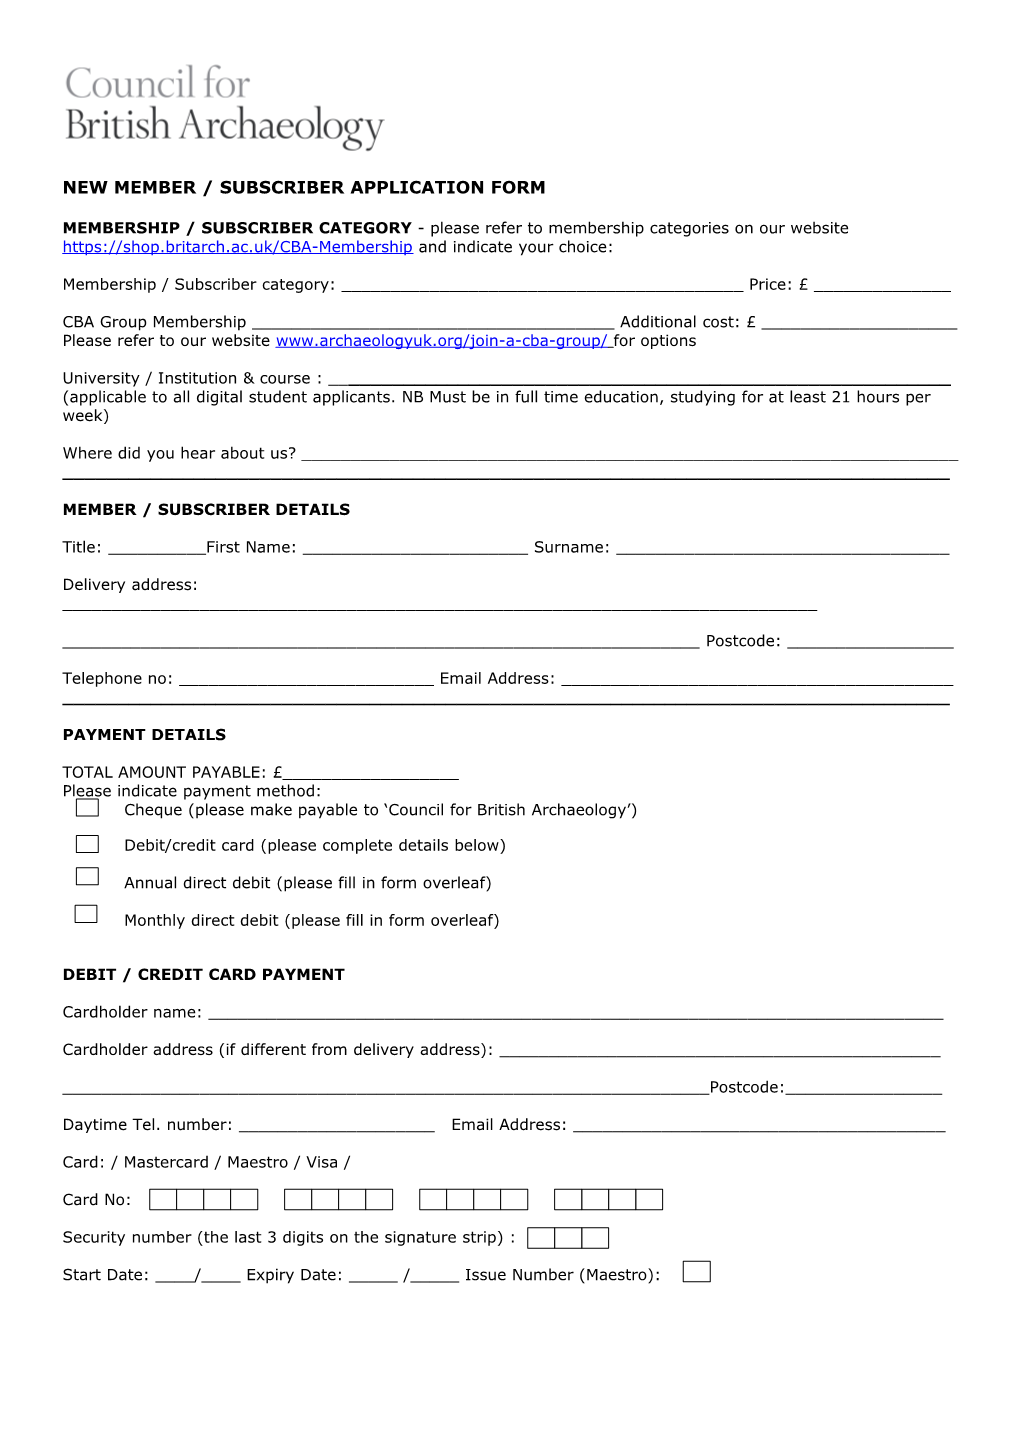 New Member / Subscriber Application Form